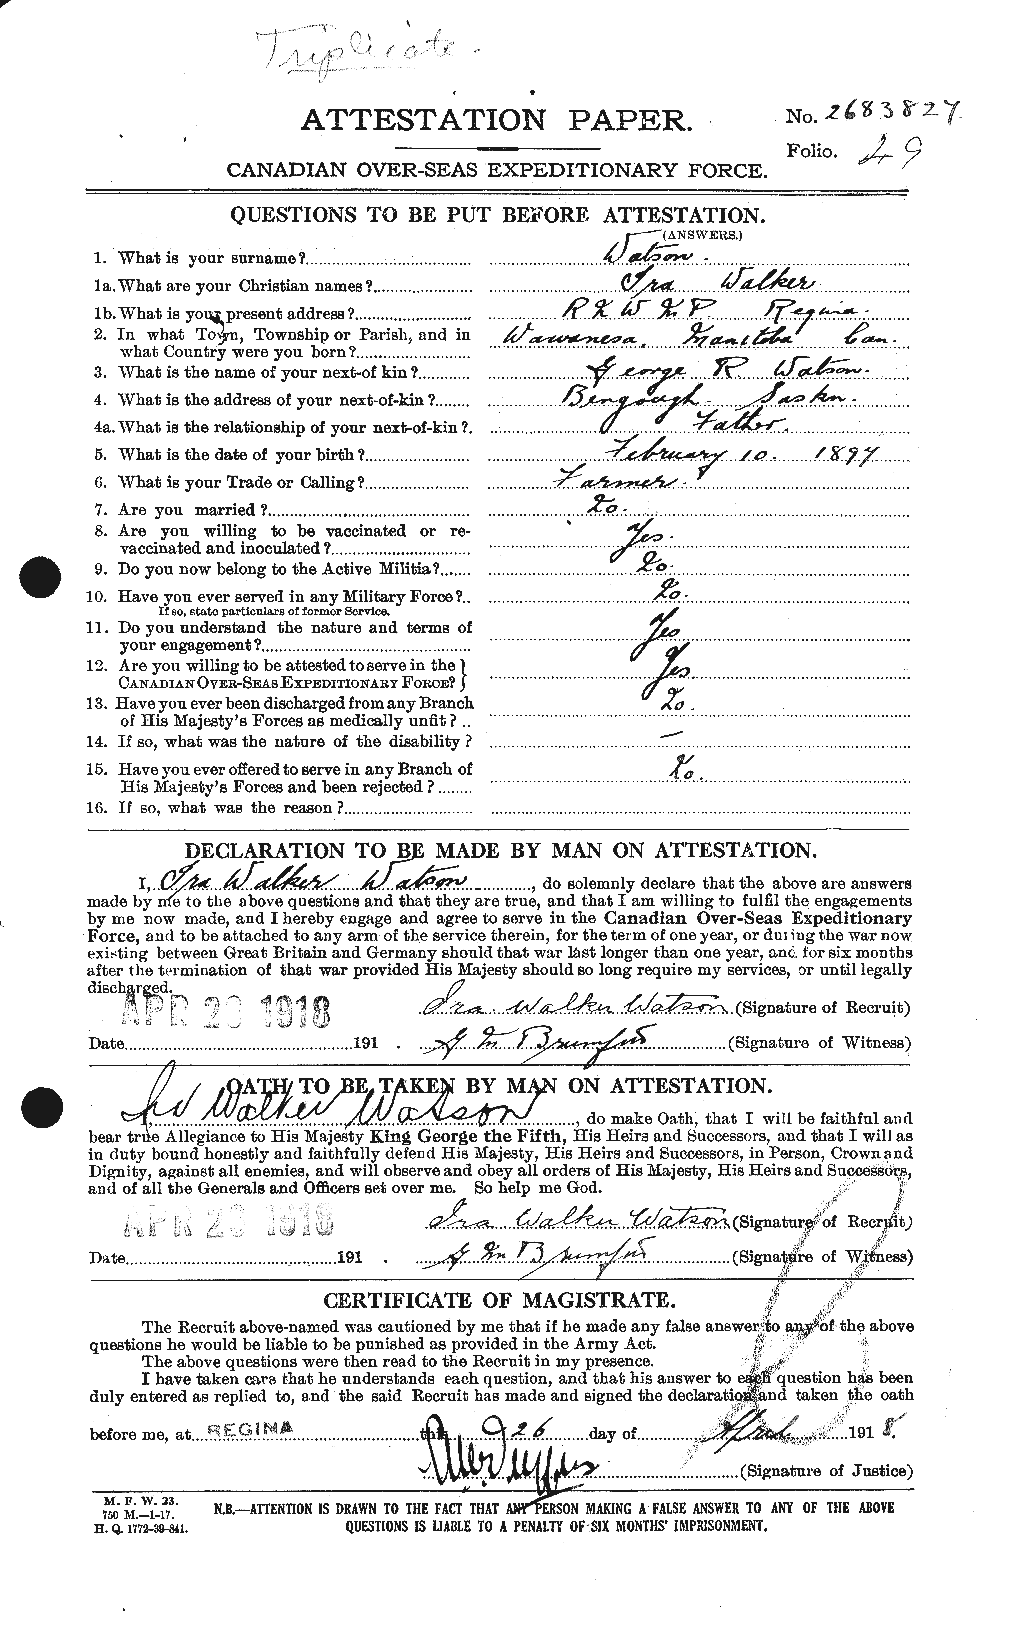 Personnel Records of the First World War - CEF 658870a